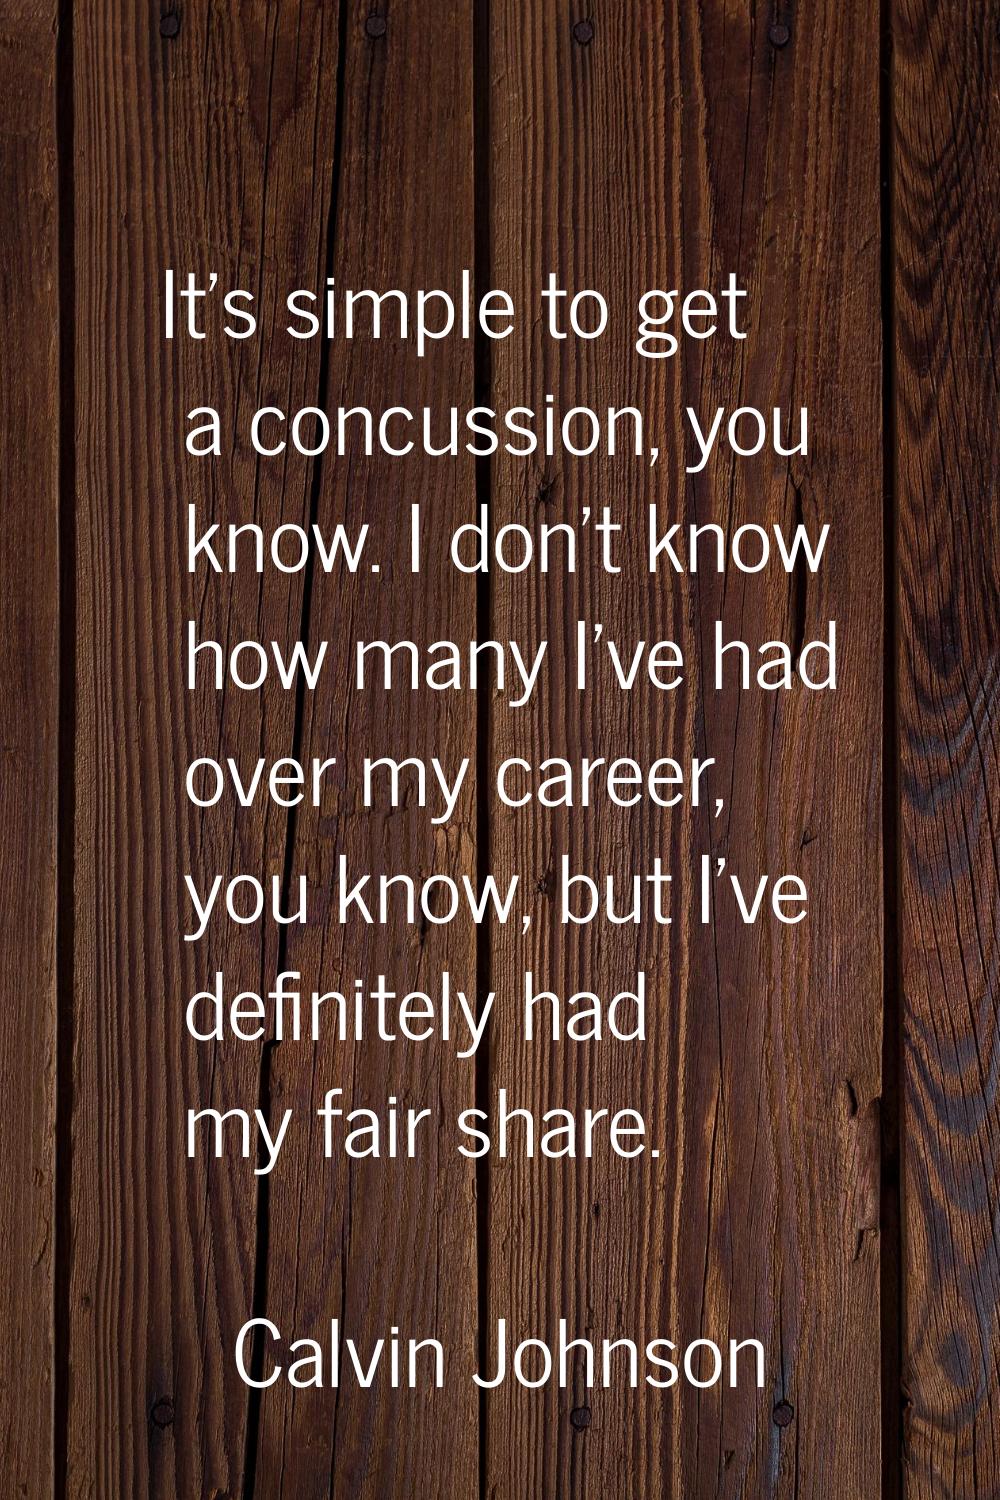 It's simple to get a concussion, you know. I don't know how many I've had over my career, you know,